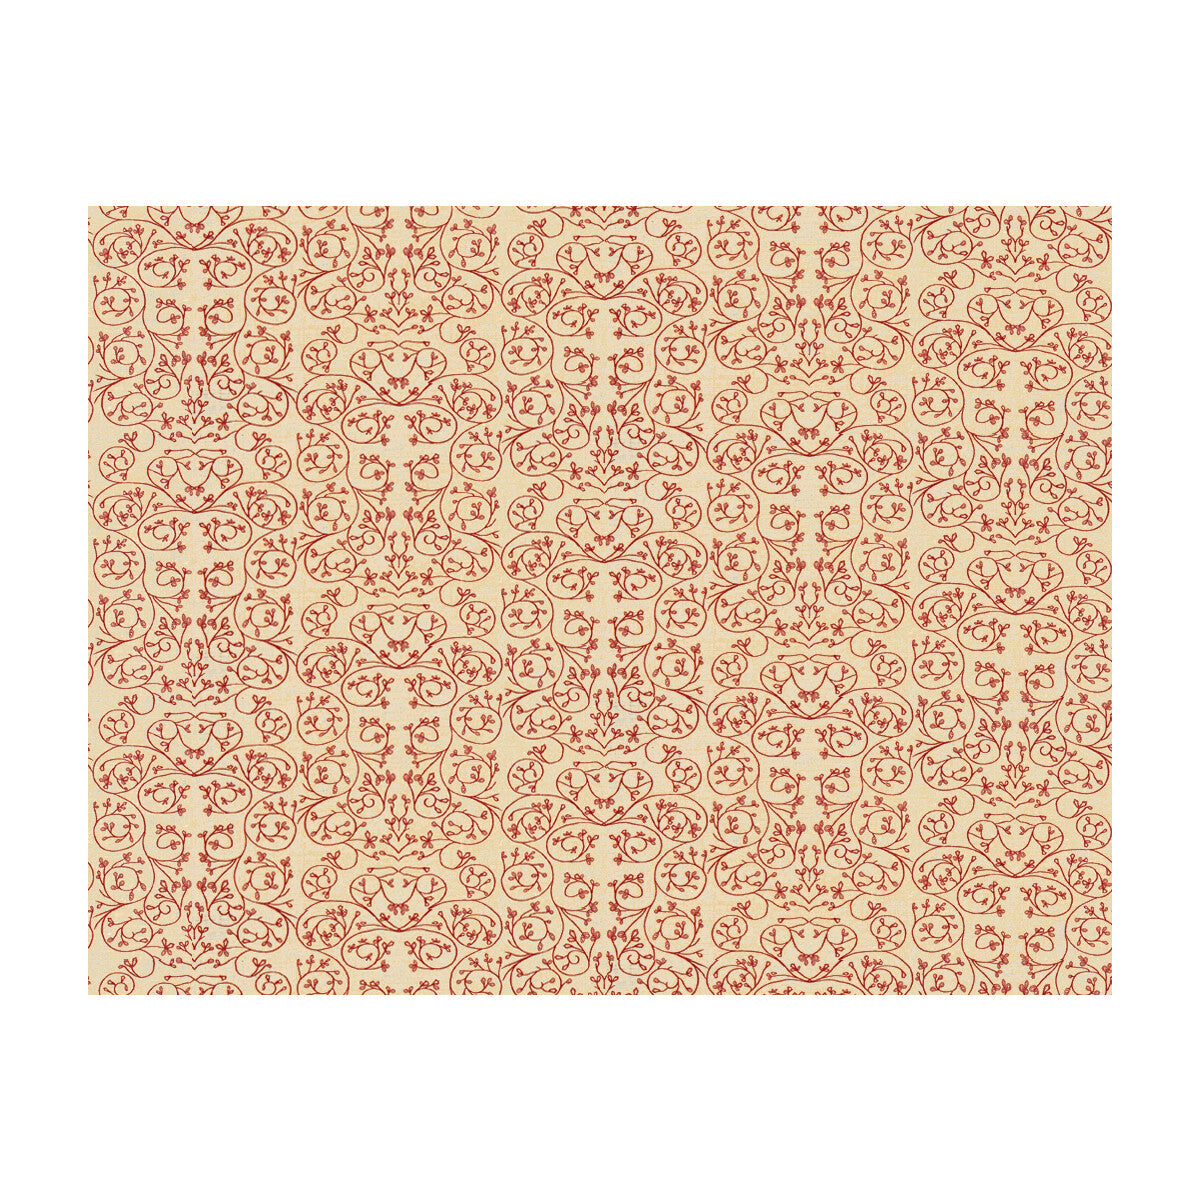 Garden fabric in cerise color - pattern GWF-3511.7.0 - by Lee Jofa Modern in the Allegra Hicks Garden collection